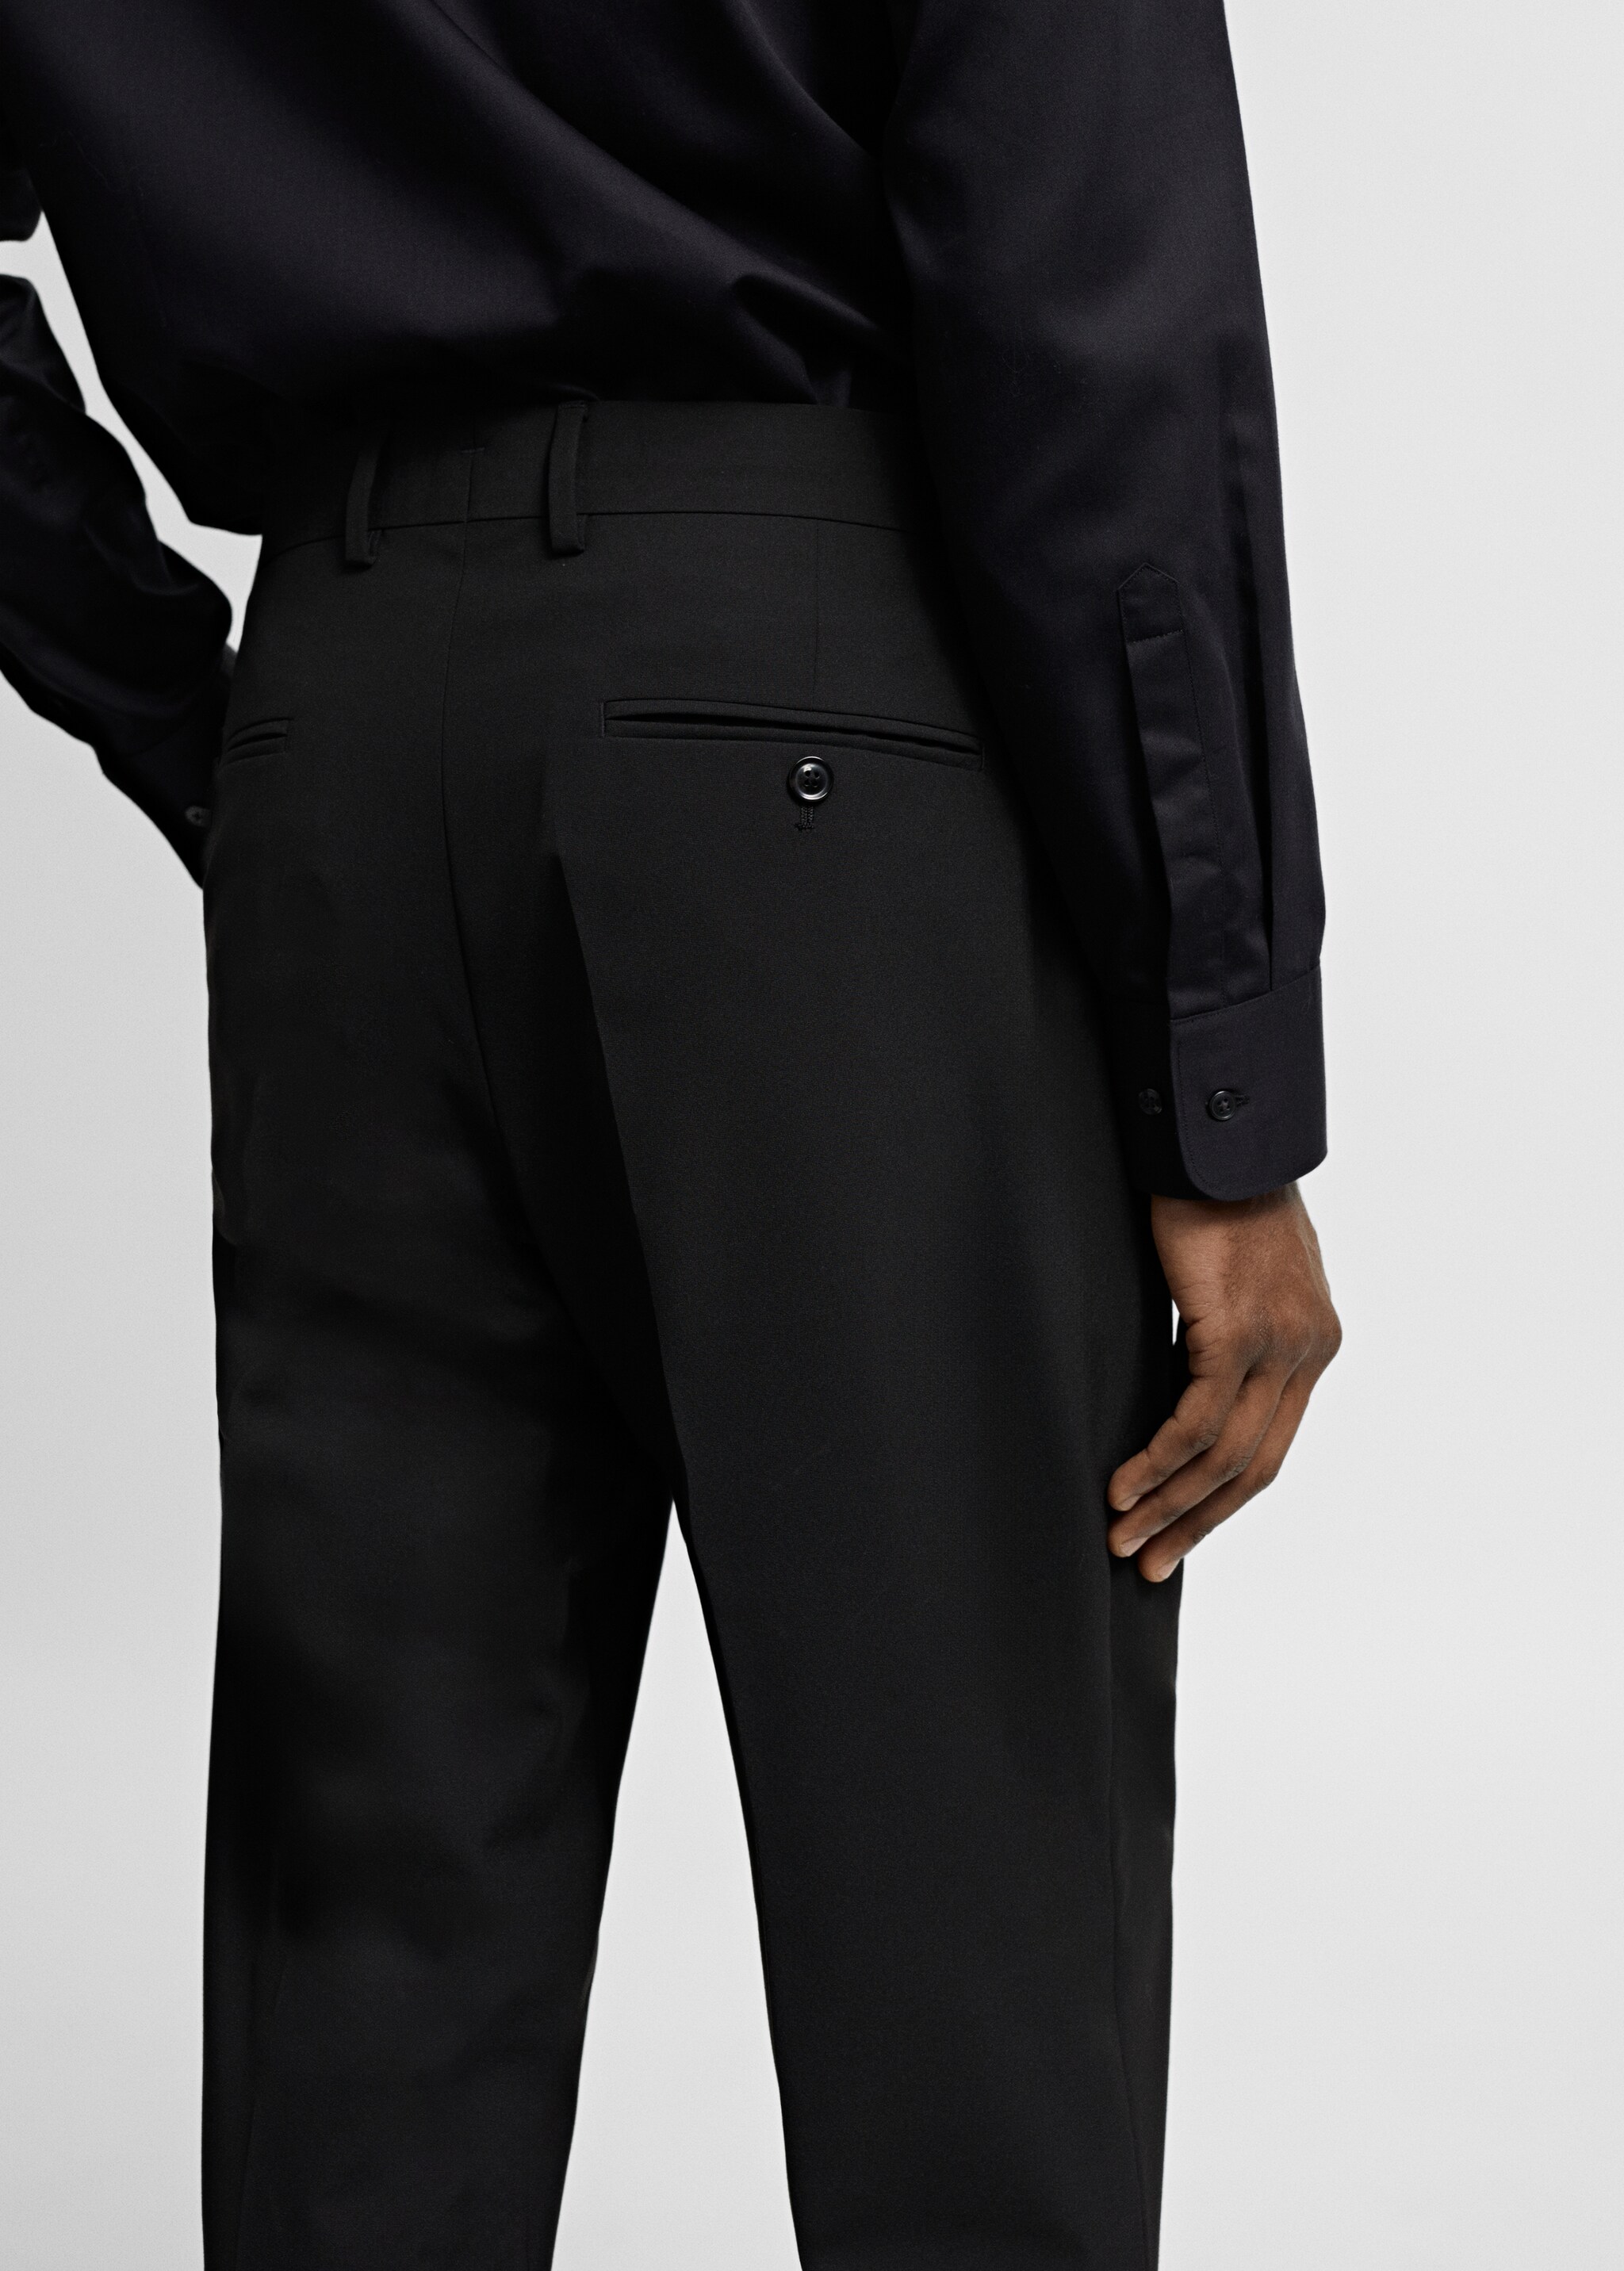  Suit trousers - Details of the article 4